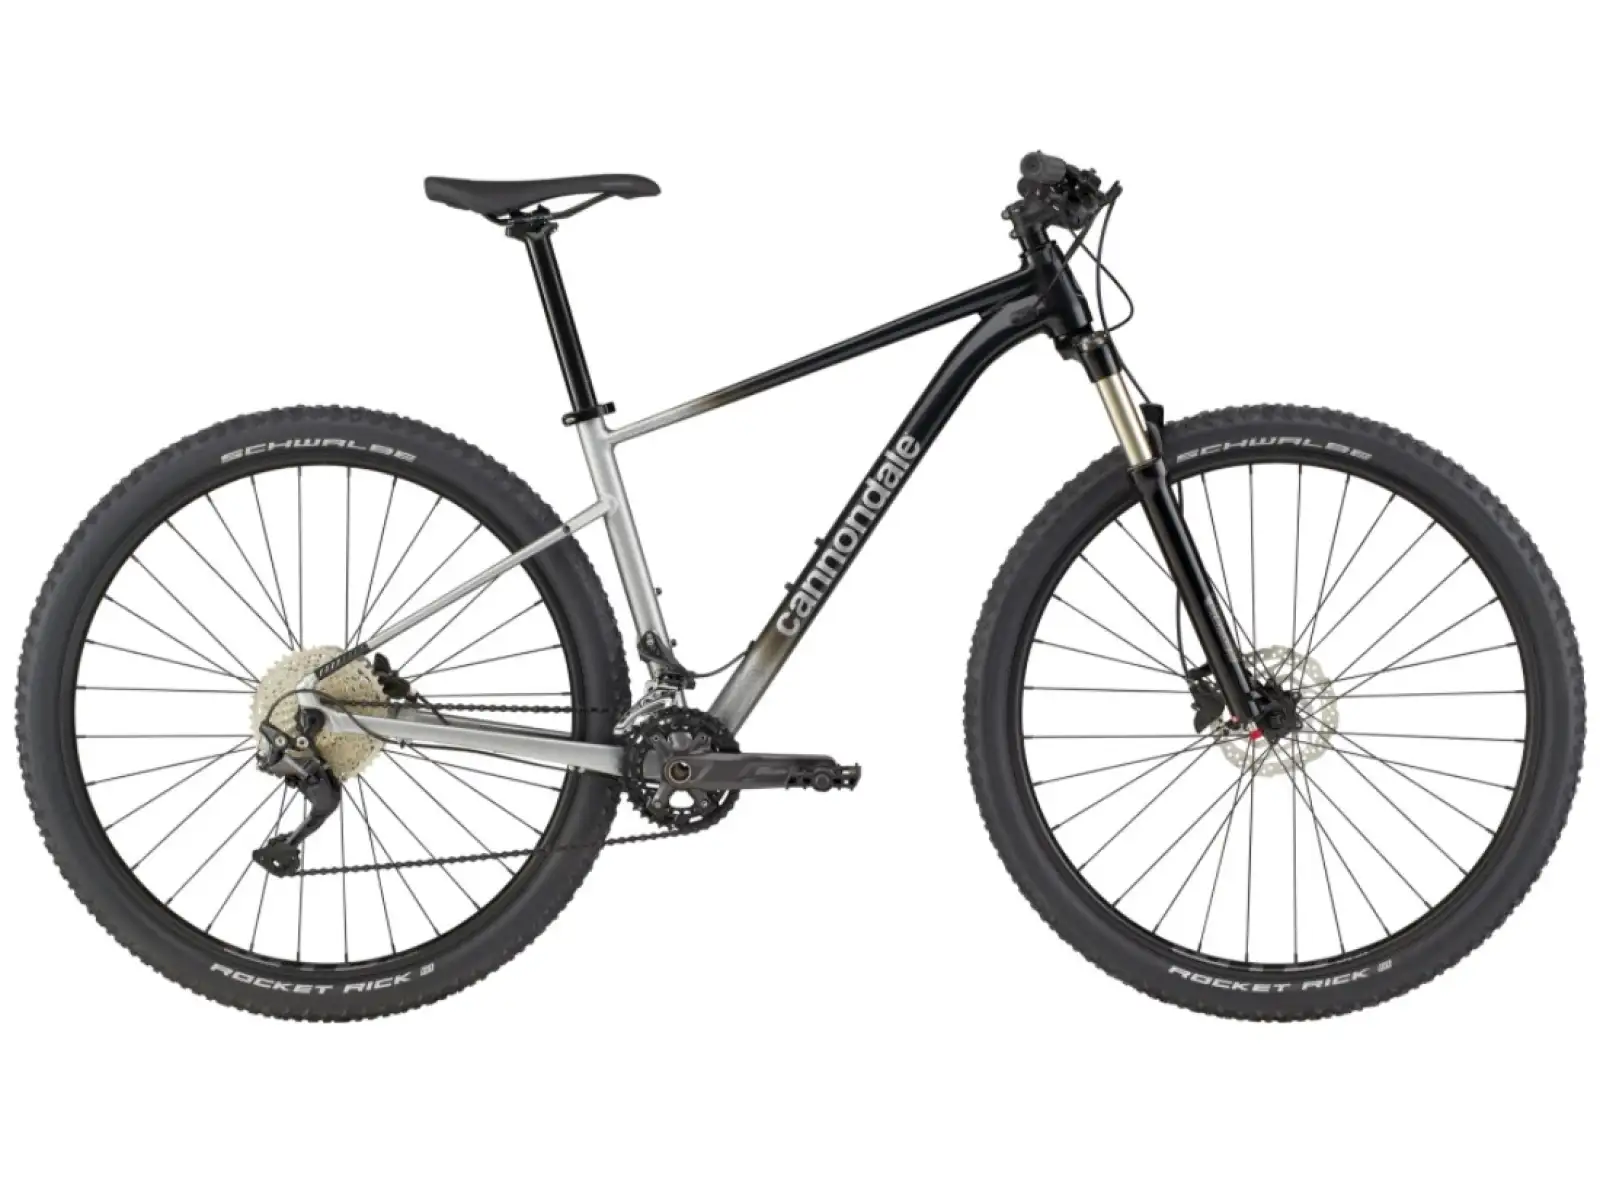 Cannondale Trail 29 SL 4 GRY horský bicykel